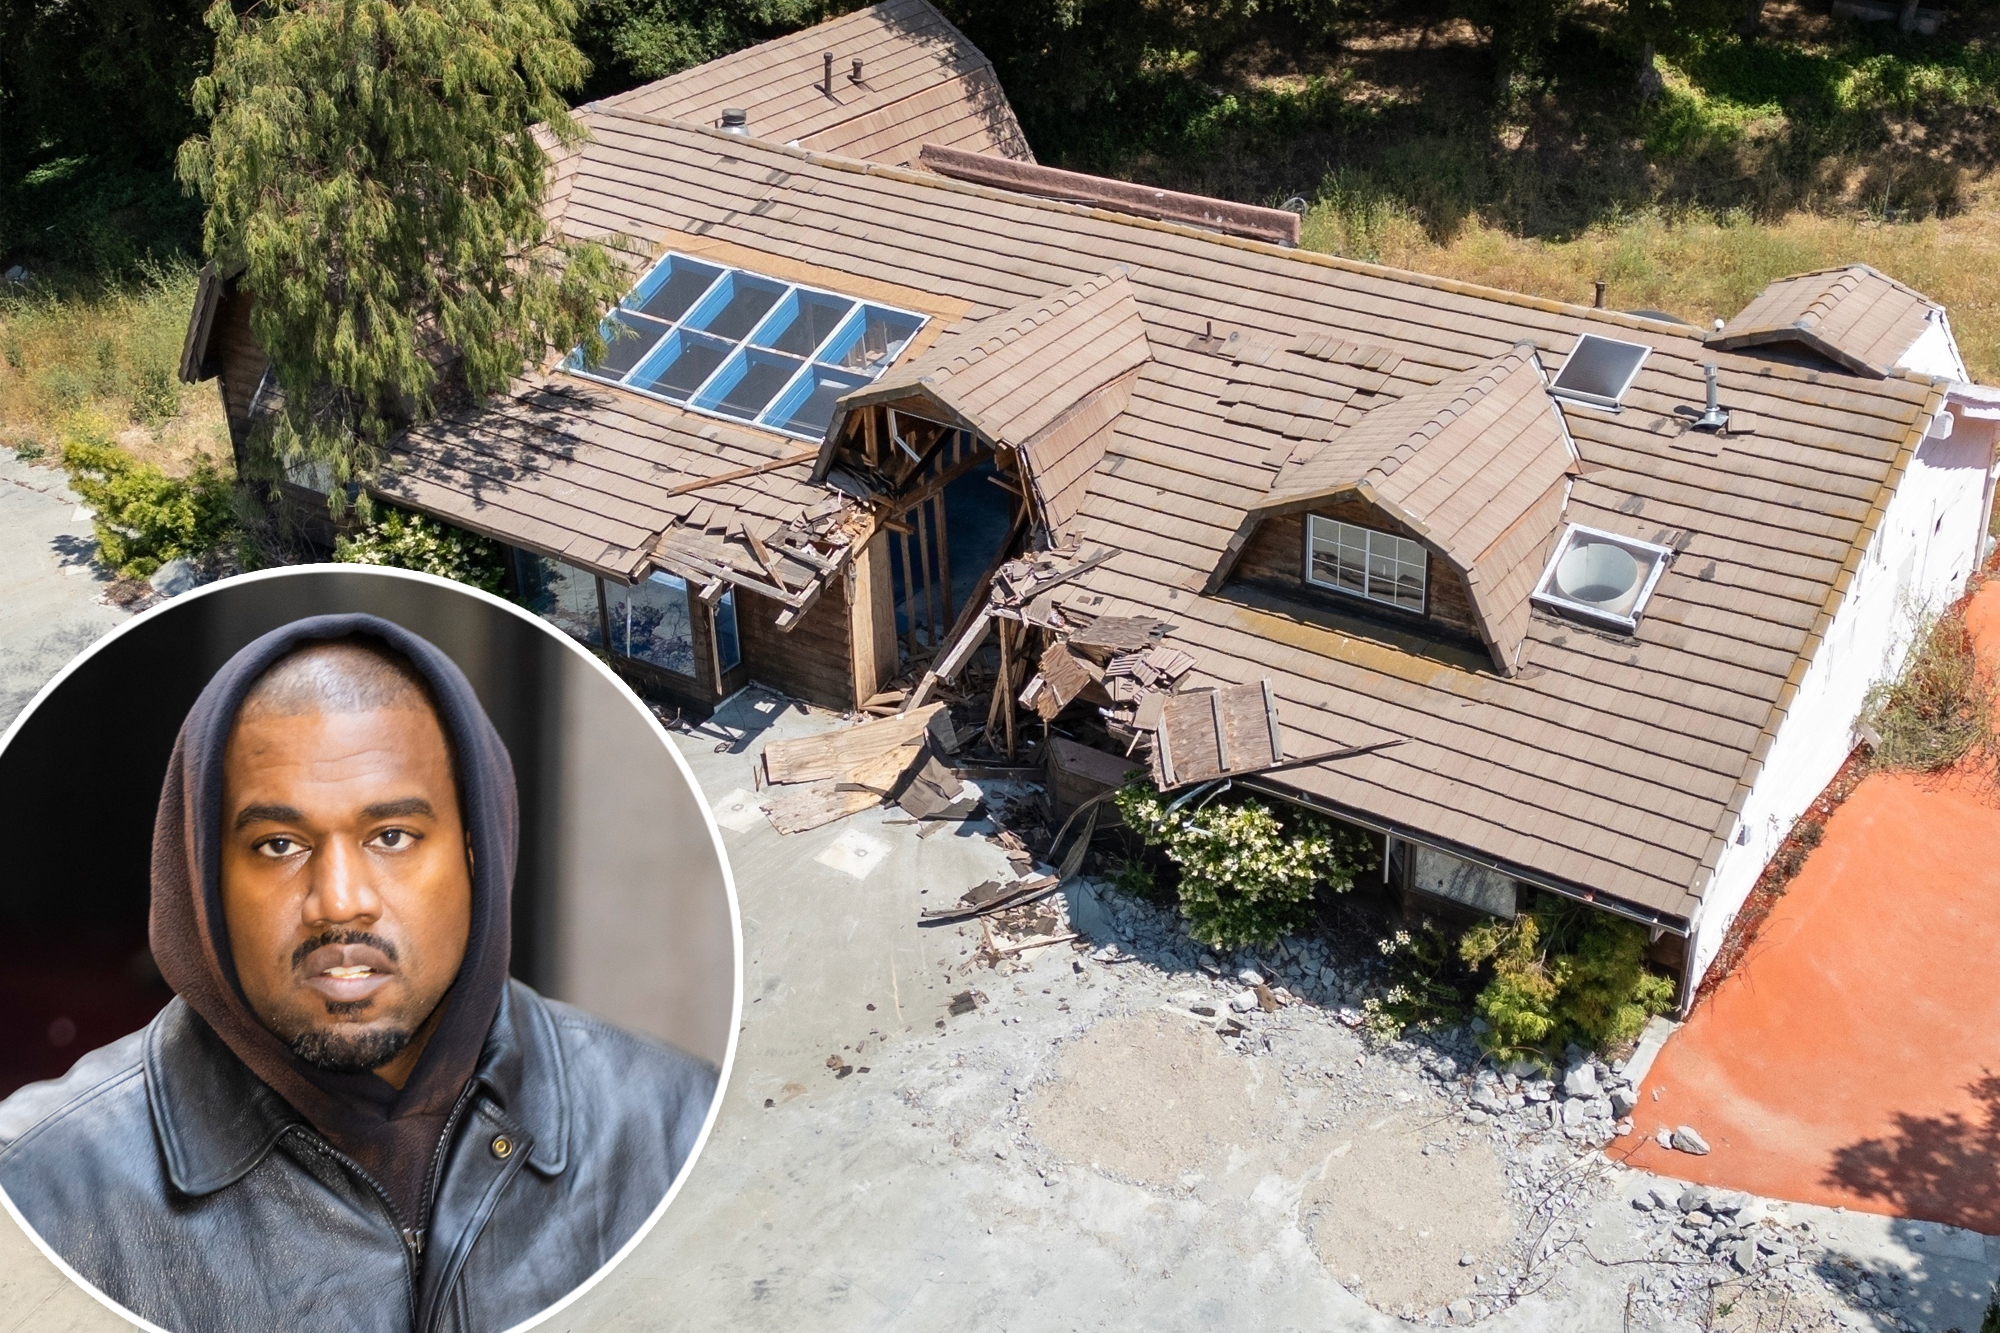 Kanye West’s abandoned $2.2M Calabasas ranch pictured in ruins